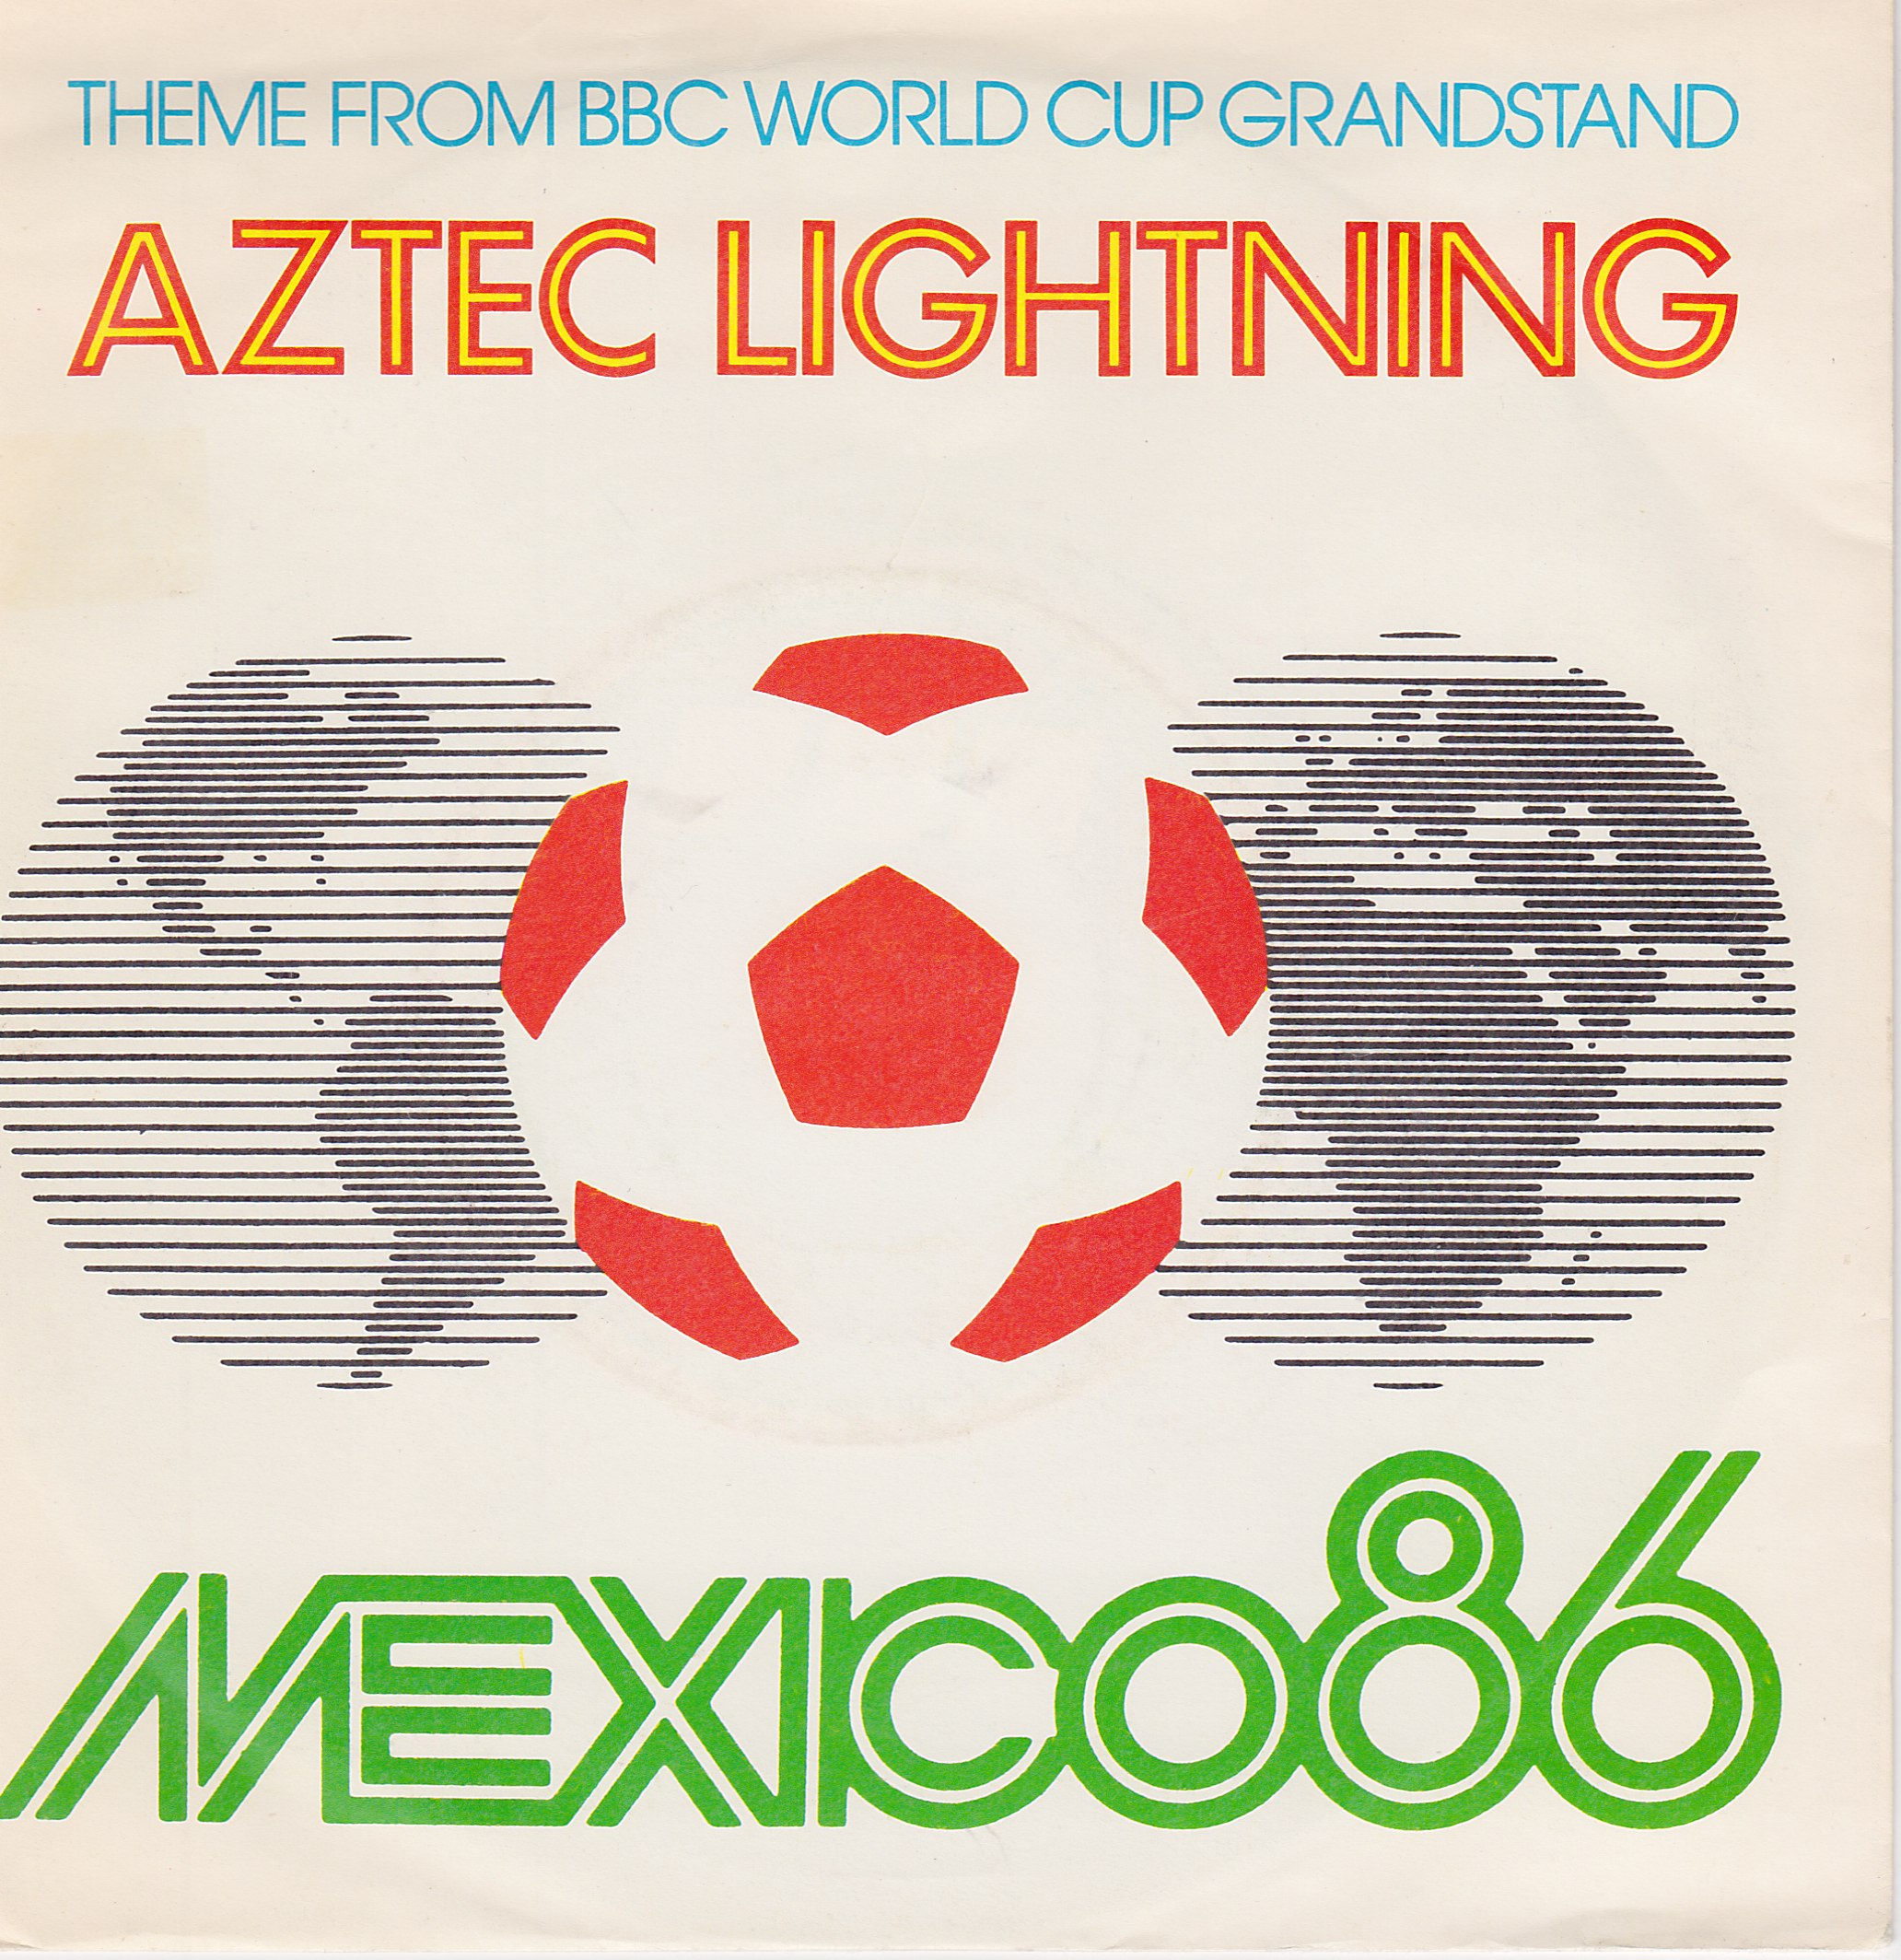 Picture of RESL 184 Aztec lightning (World cup grandstand '86) by artist Heads from the BBC records and Tapes library